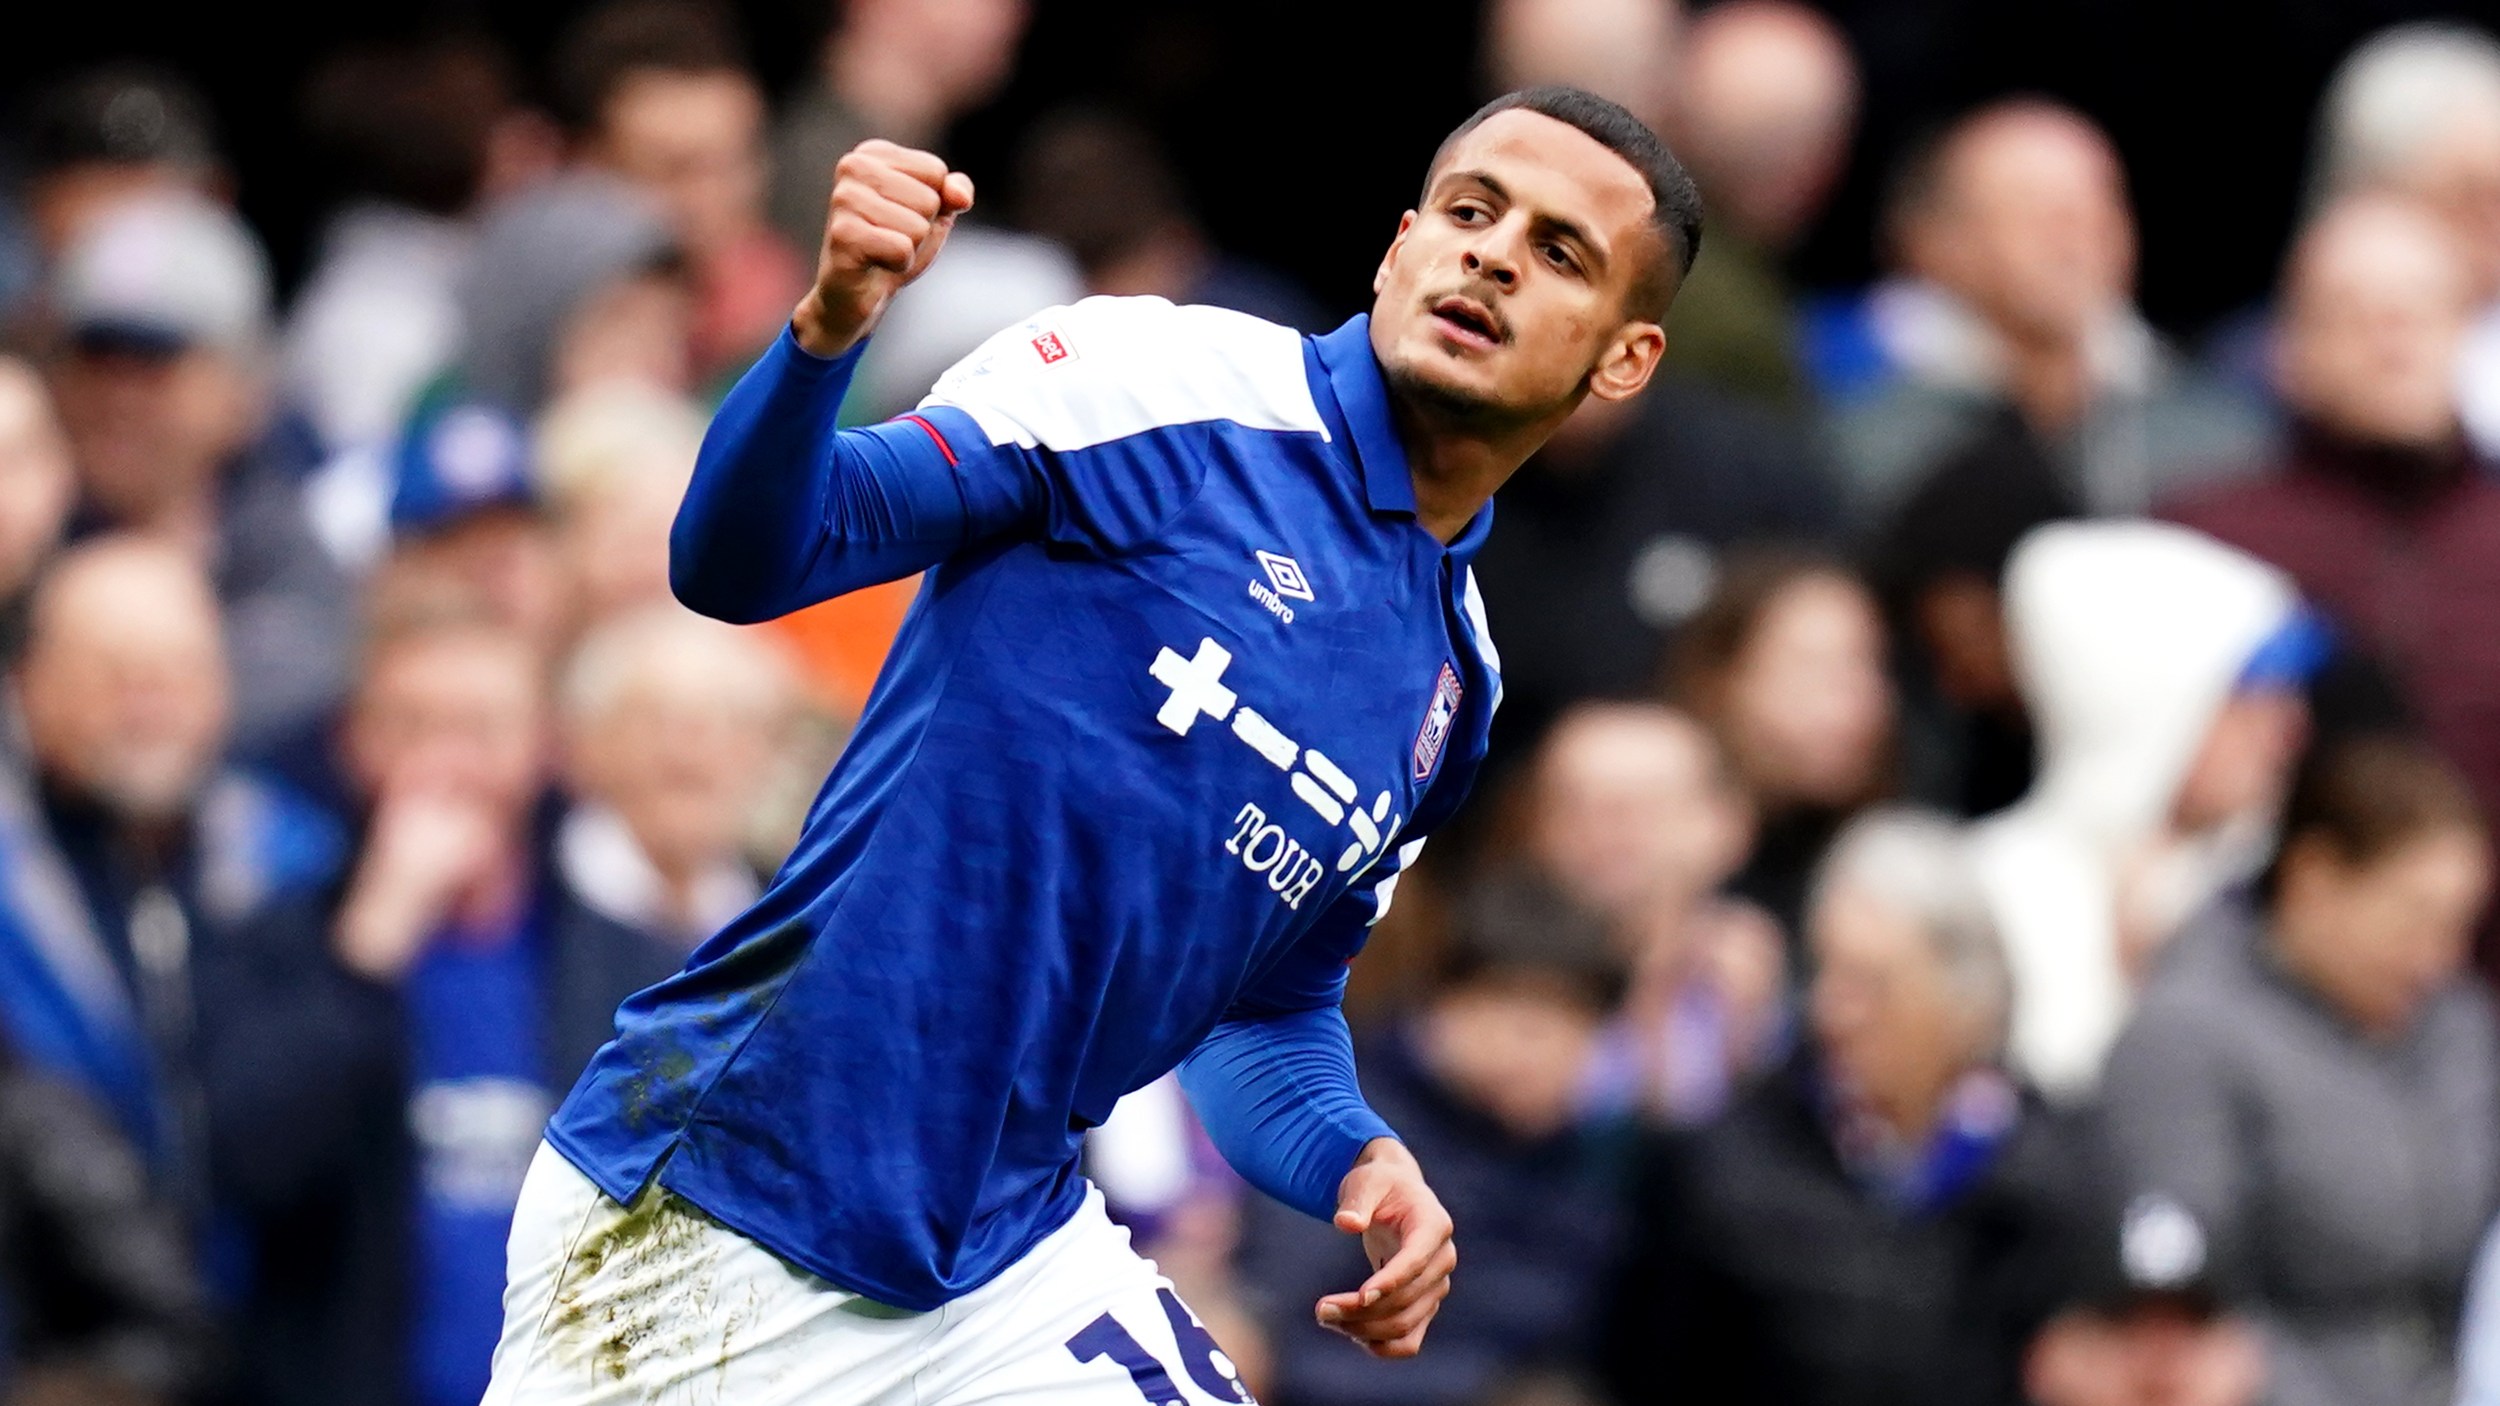 Al-Hamadi celebrates scoring in Ipswich’s 6-0 win against Sheffield Wednesday before the international break. He has four goals in his past seven Championship matches